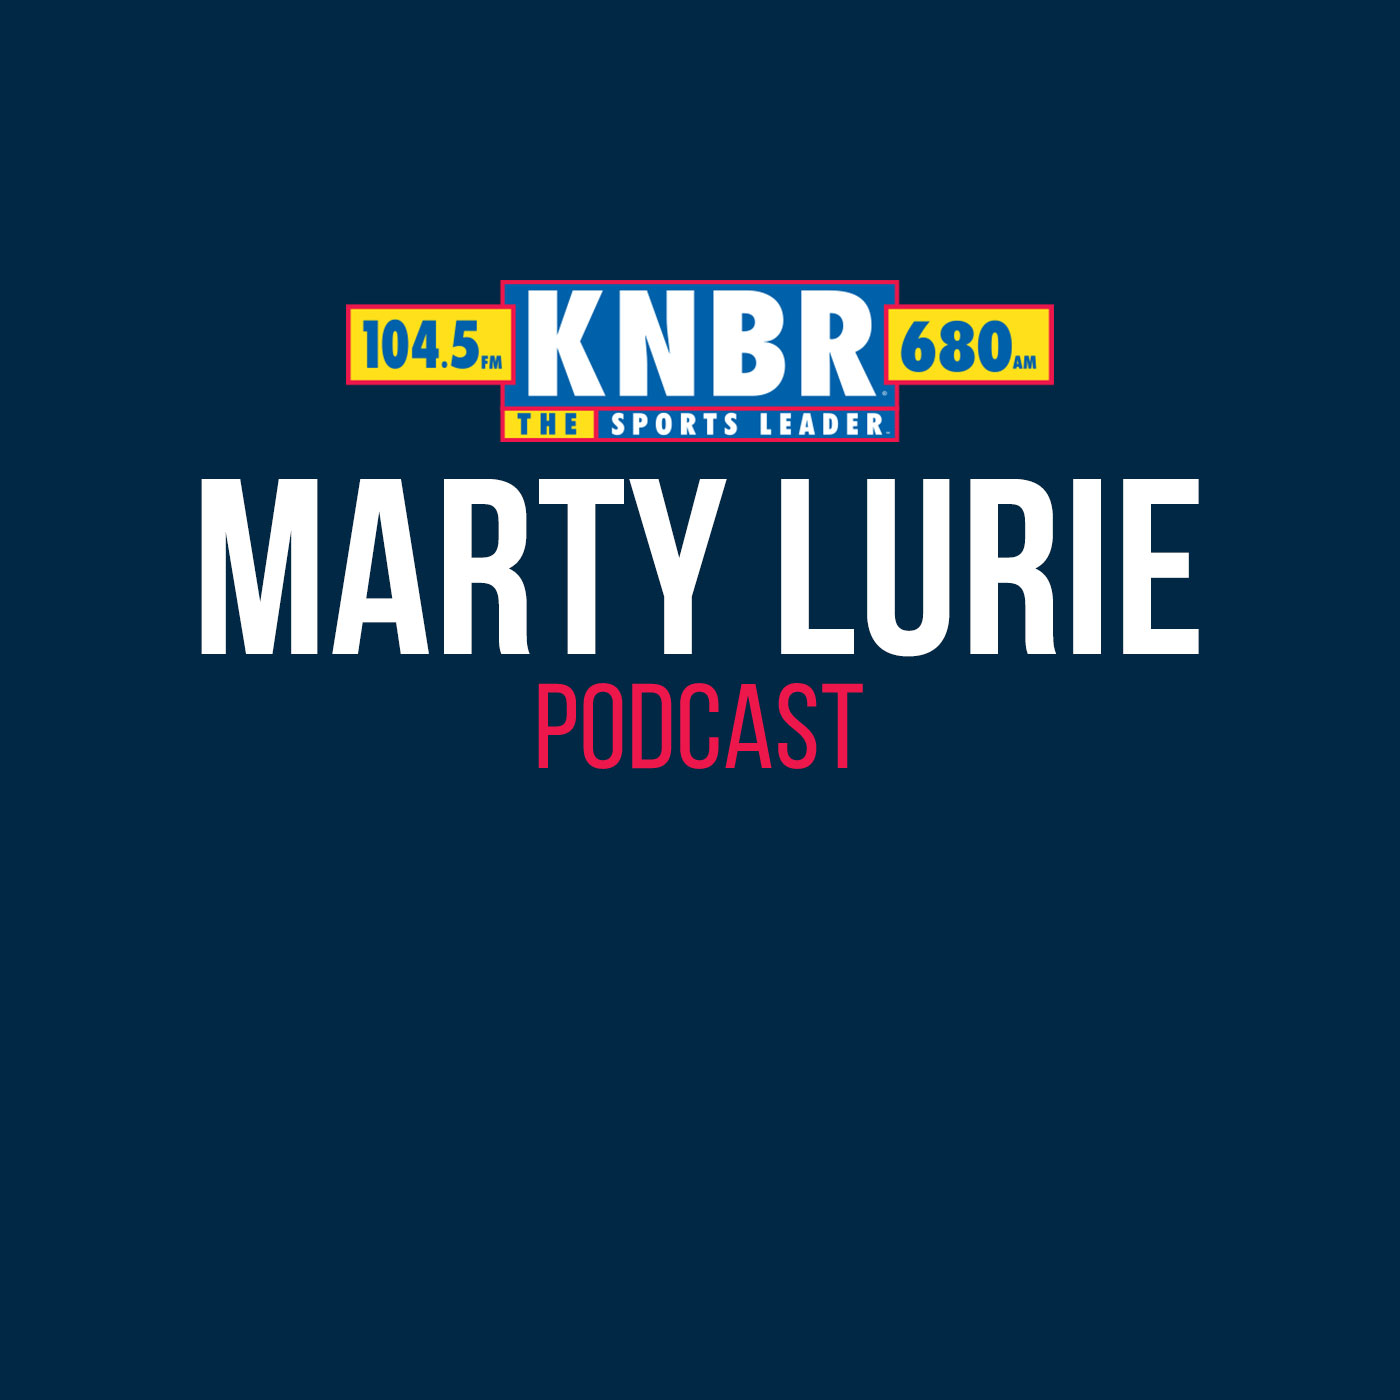 6-26 Larry Krueger joins Talkin' Baseball with Marty & Bill to talk about why is this year might be the greatest Giants season ever?